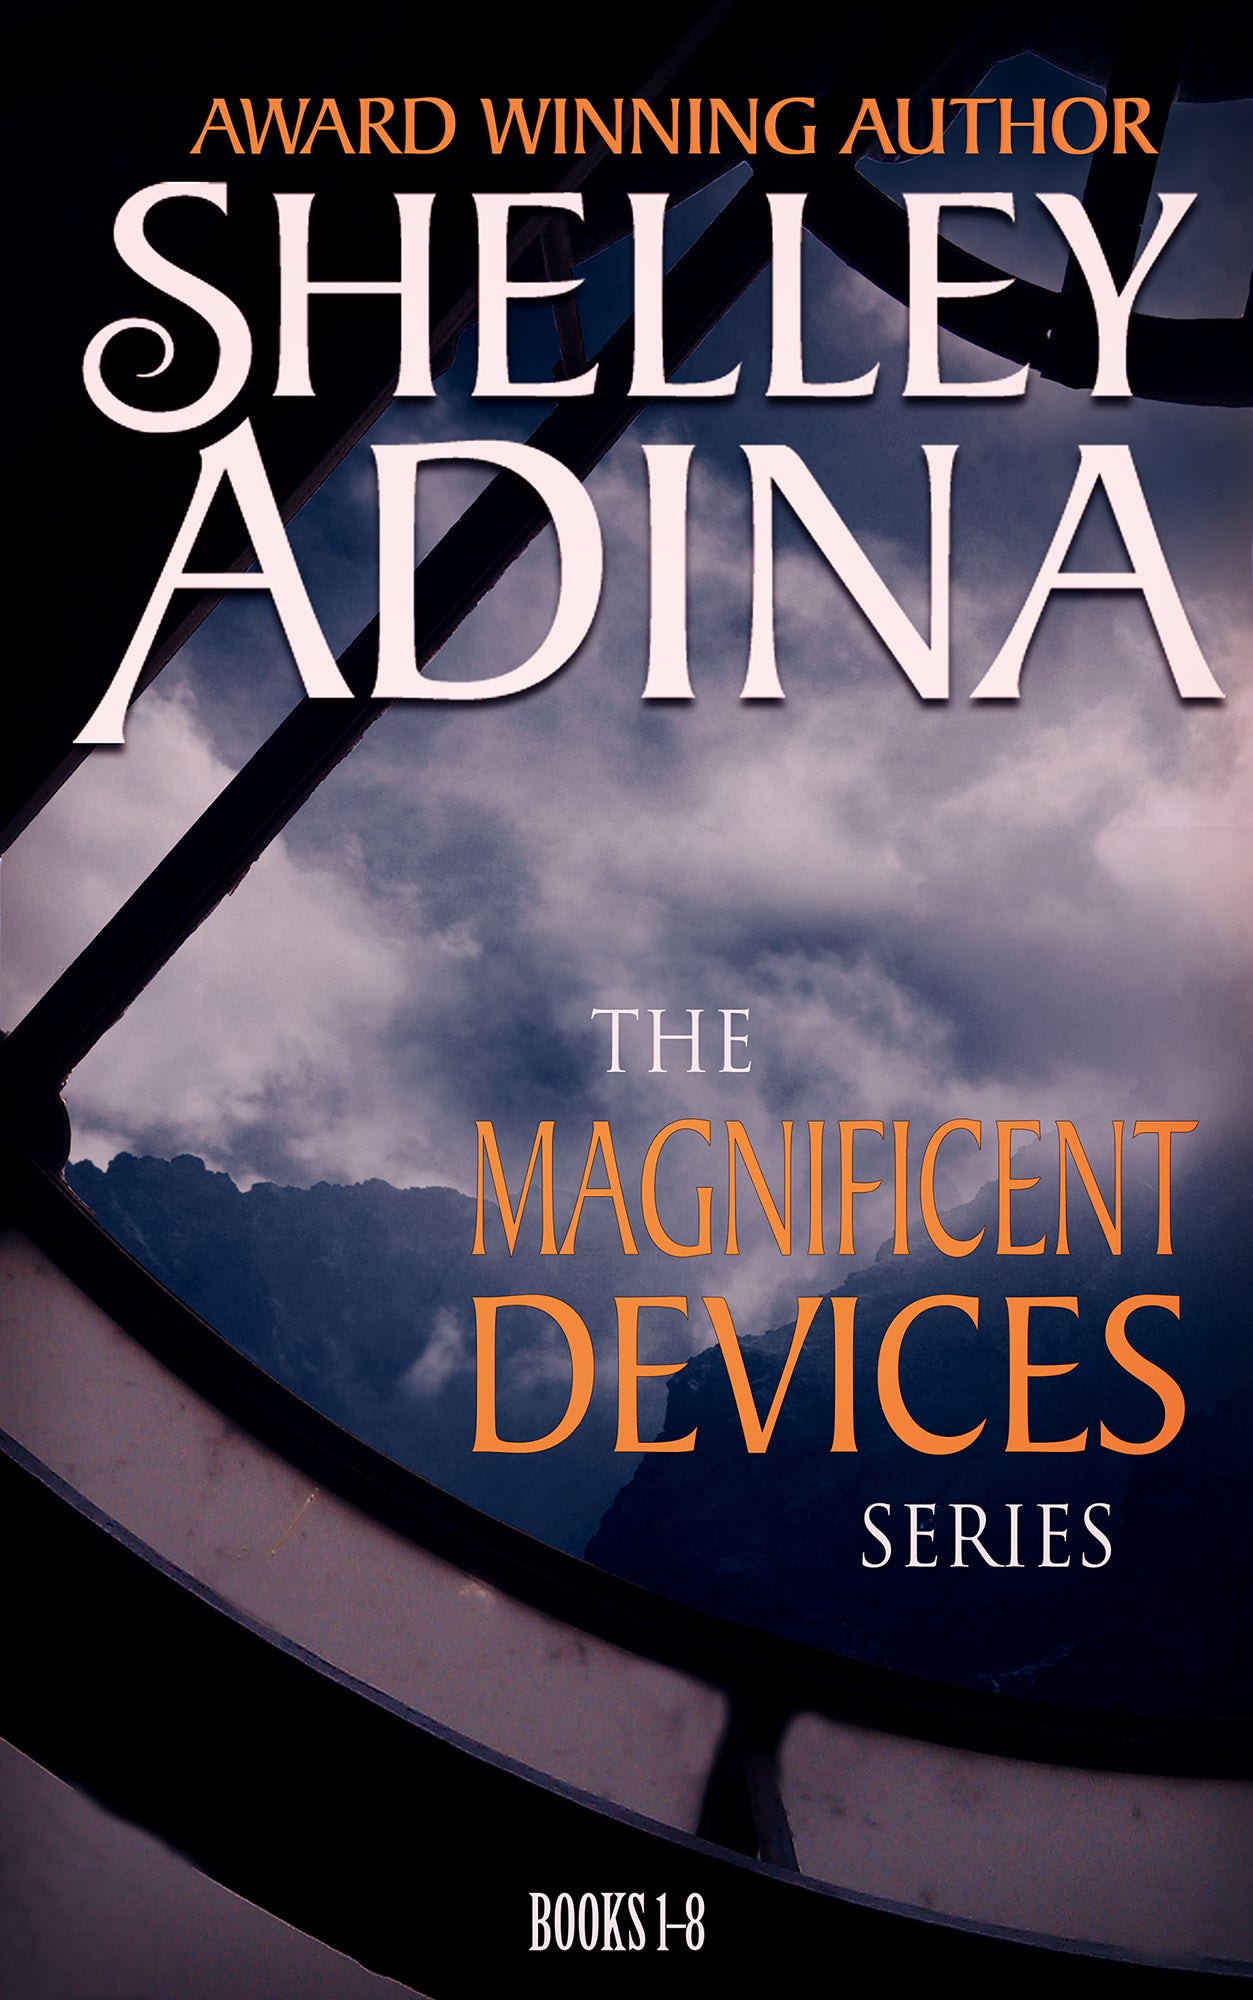 Magnificent Devices Books 1-8 written by Shelley Adina